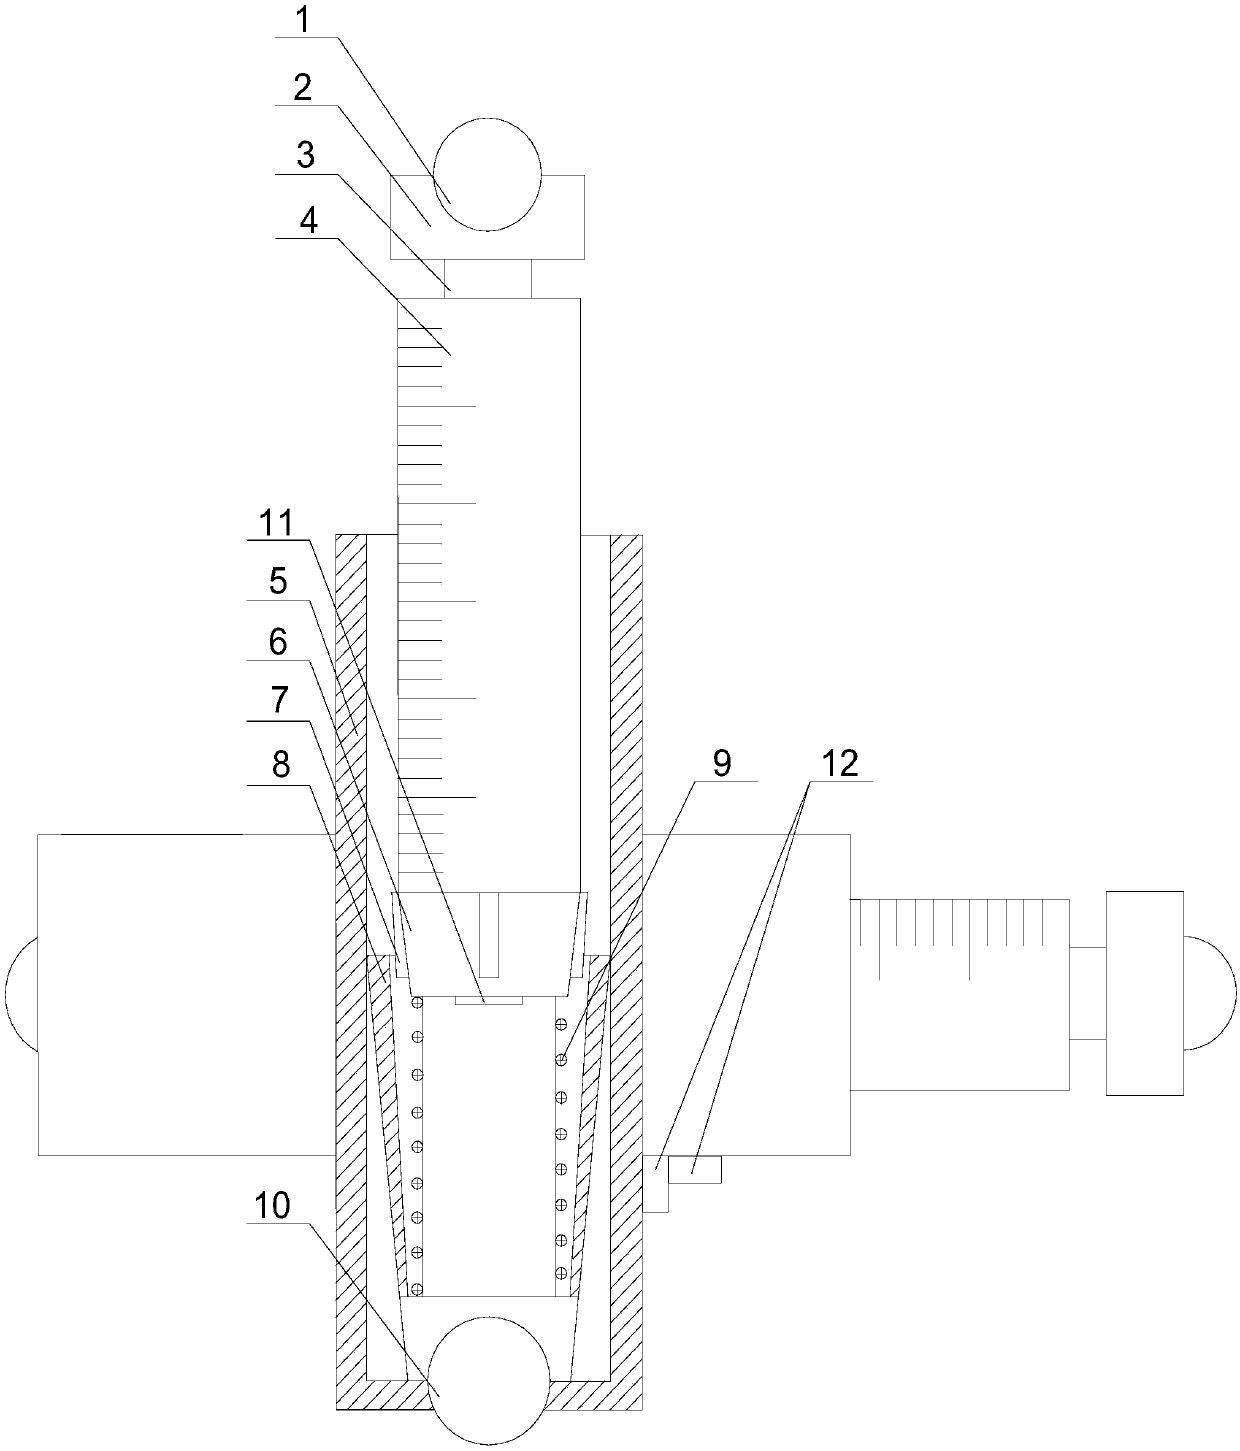 Device for rapidly measuring inner diameter of building pipe fitting